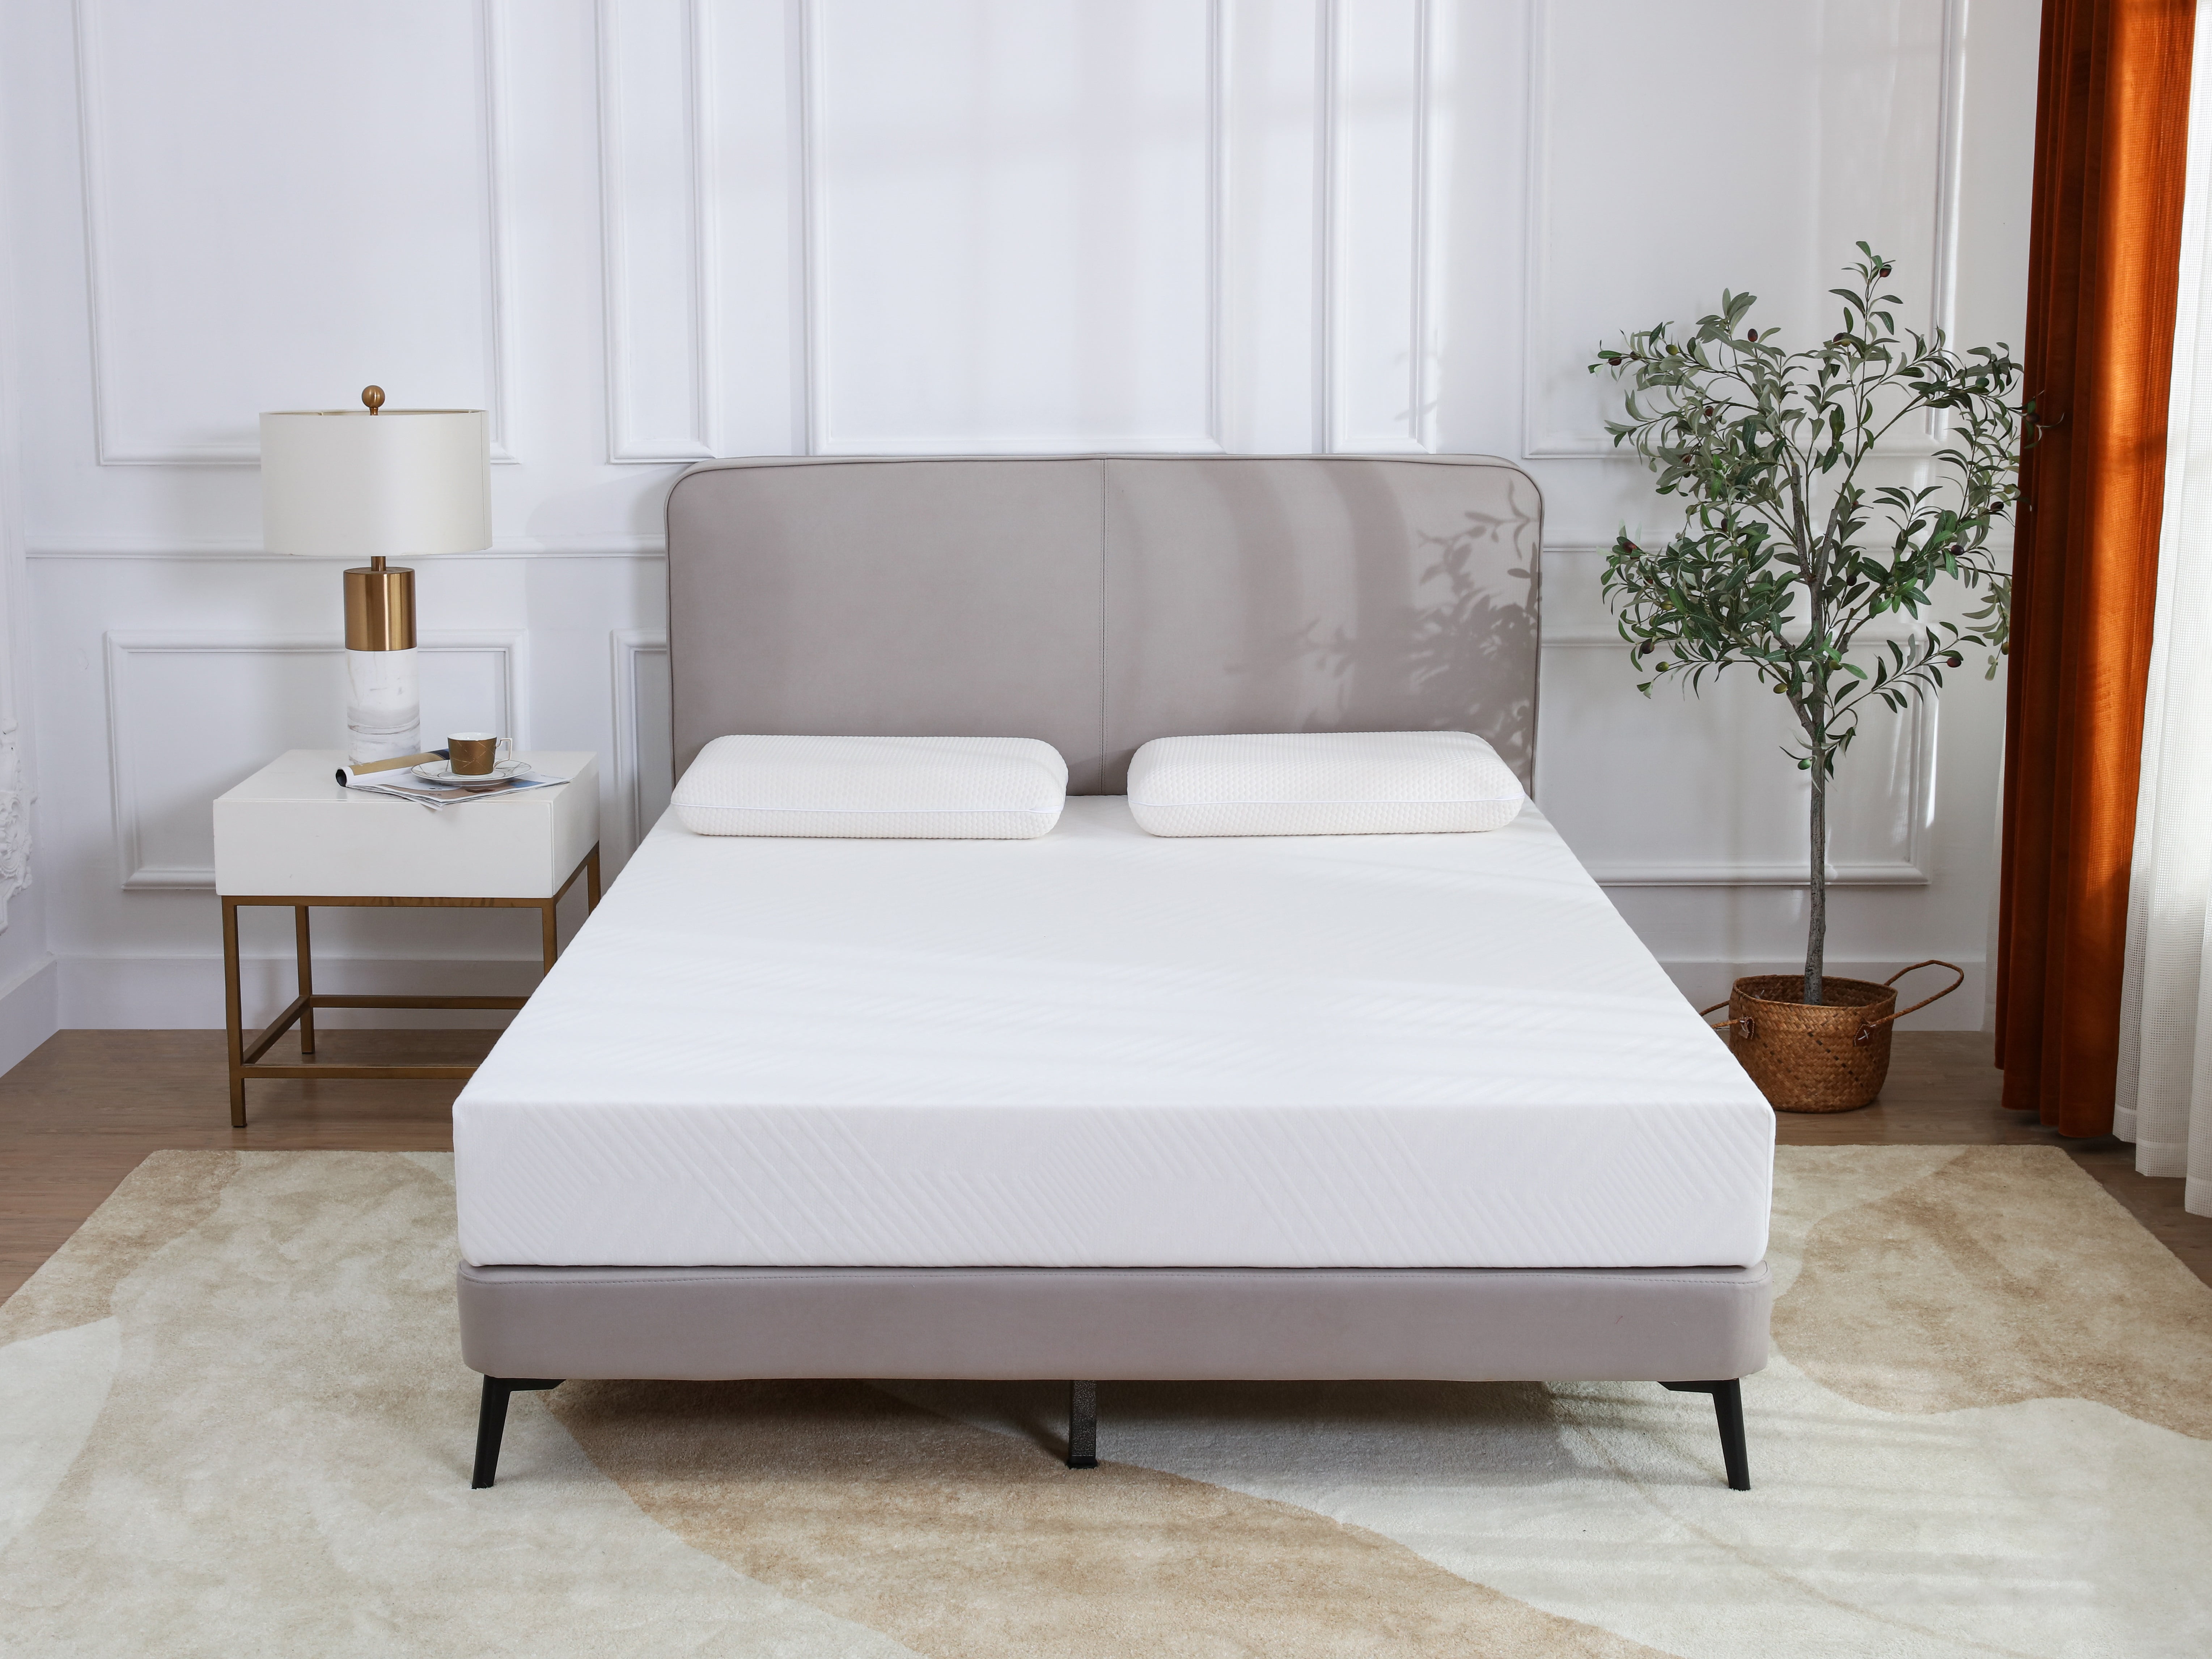 Details about   8" Mattress Standard Full Size Rolled Mattress Bedroom Heavy-duty Traditional 